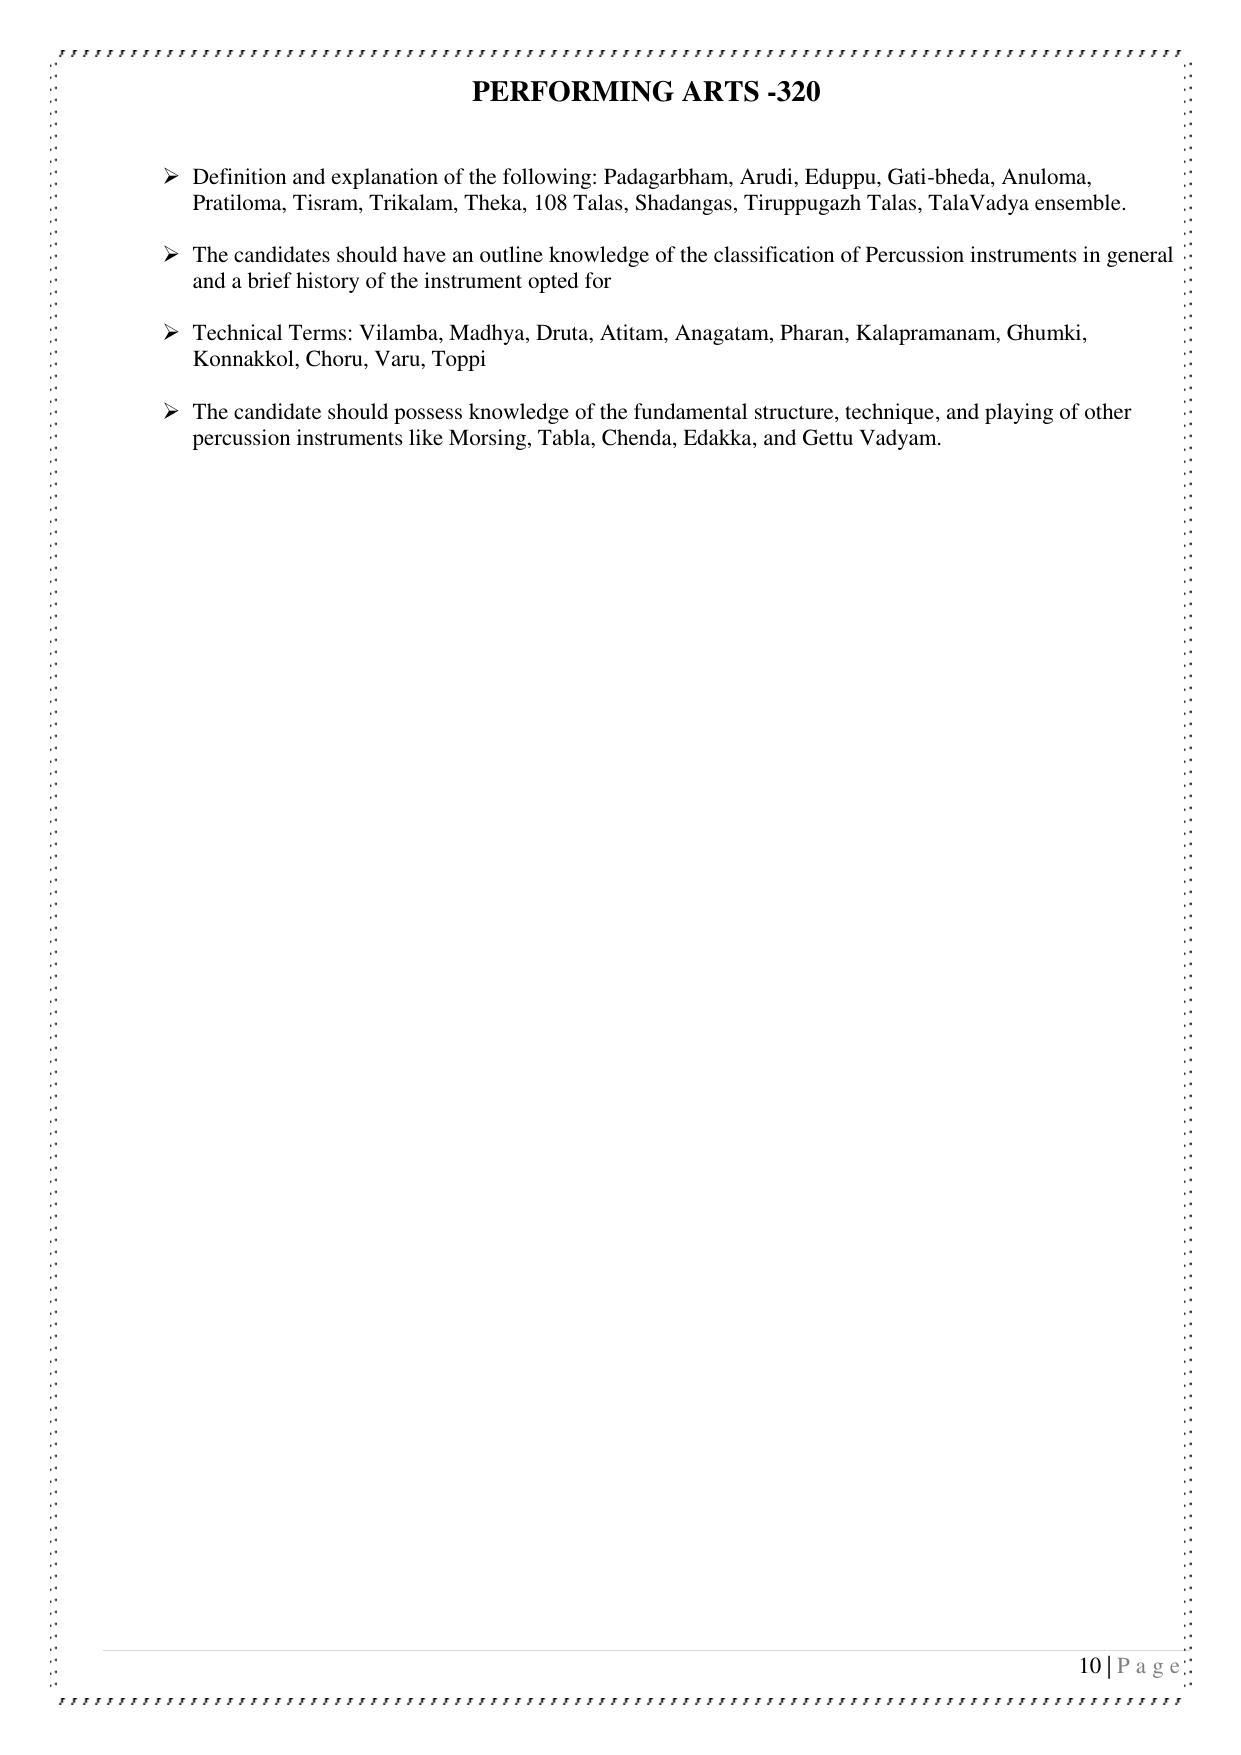 CUET Syllabus for Performing Arts (English) - Page 10